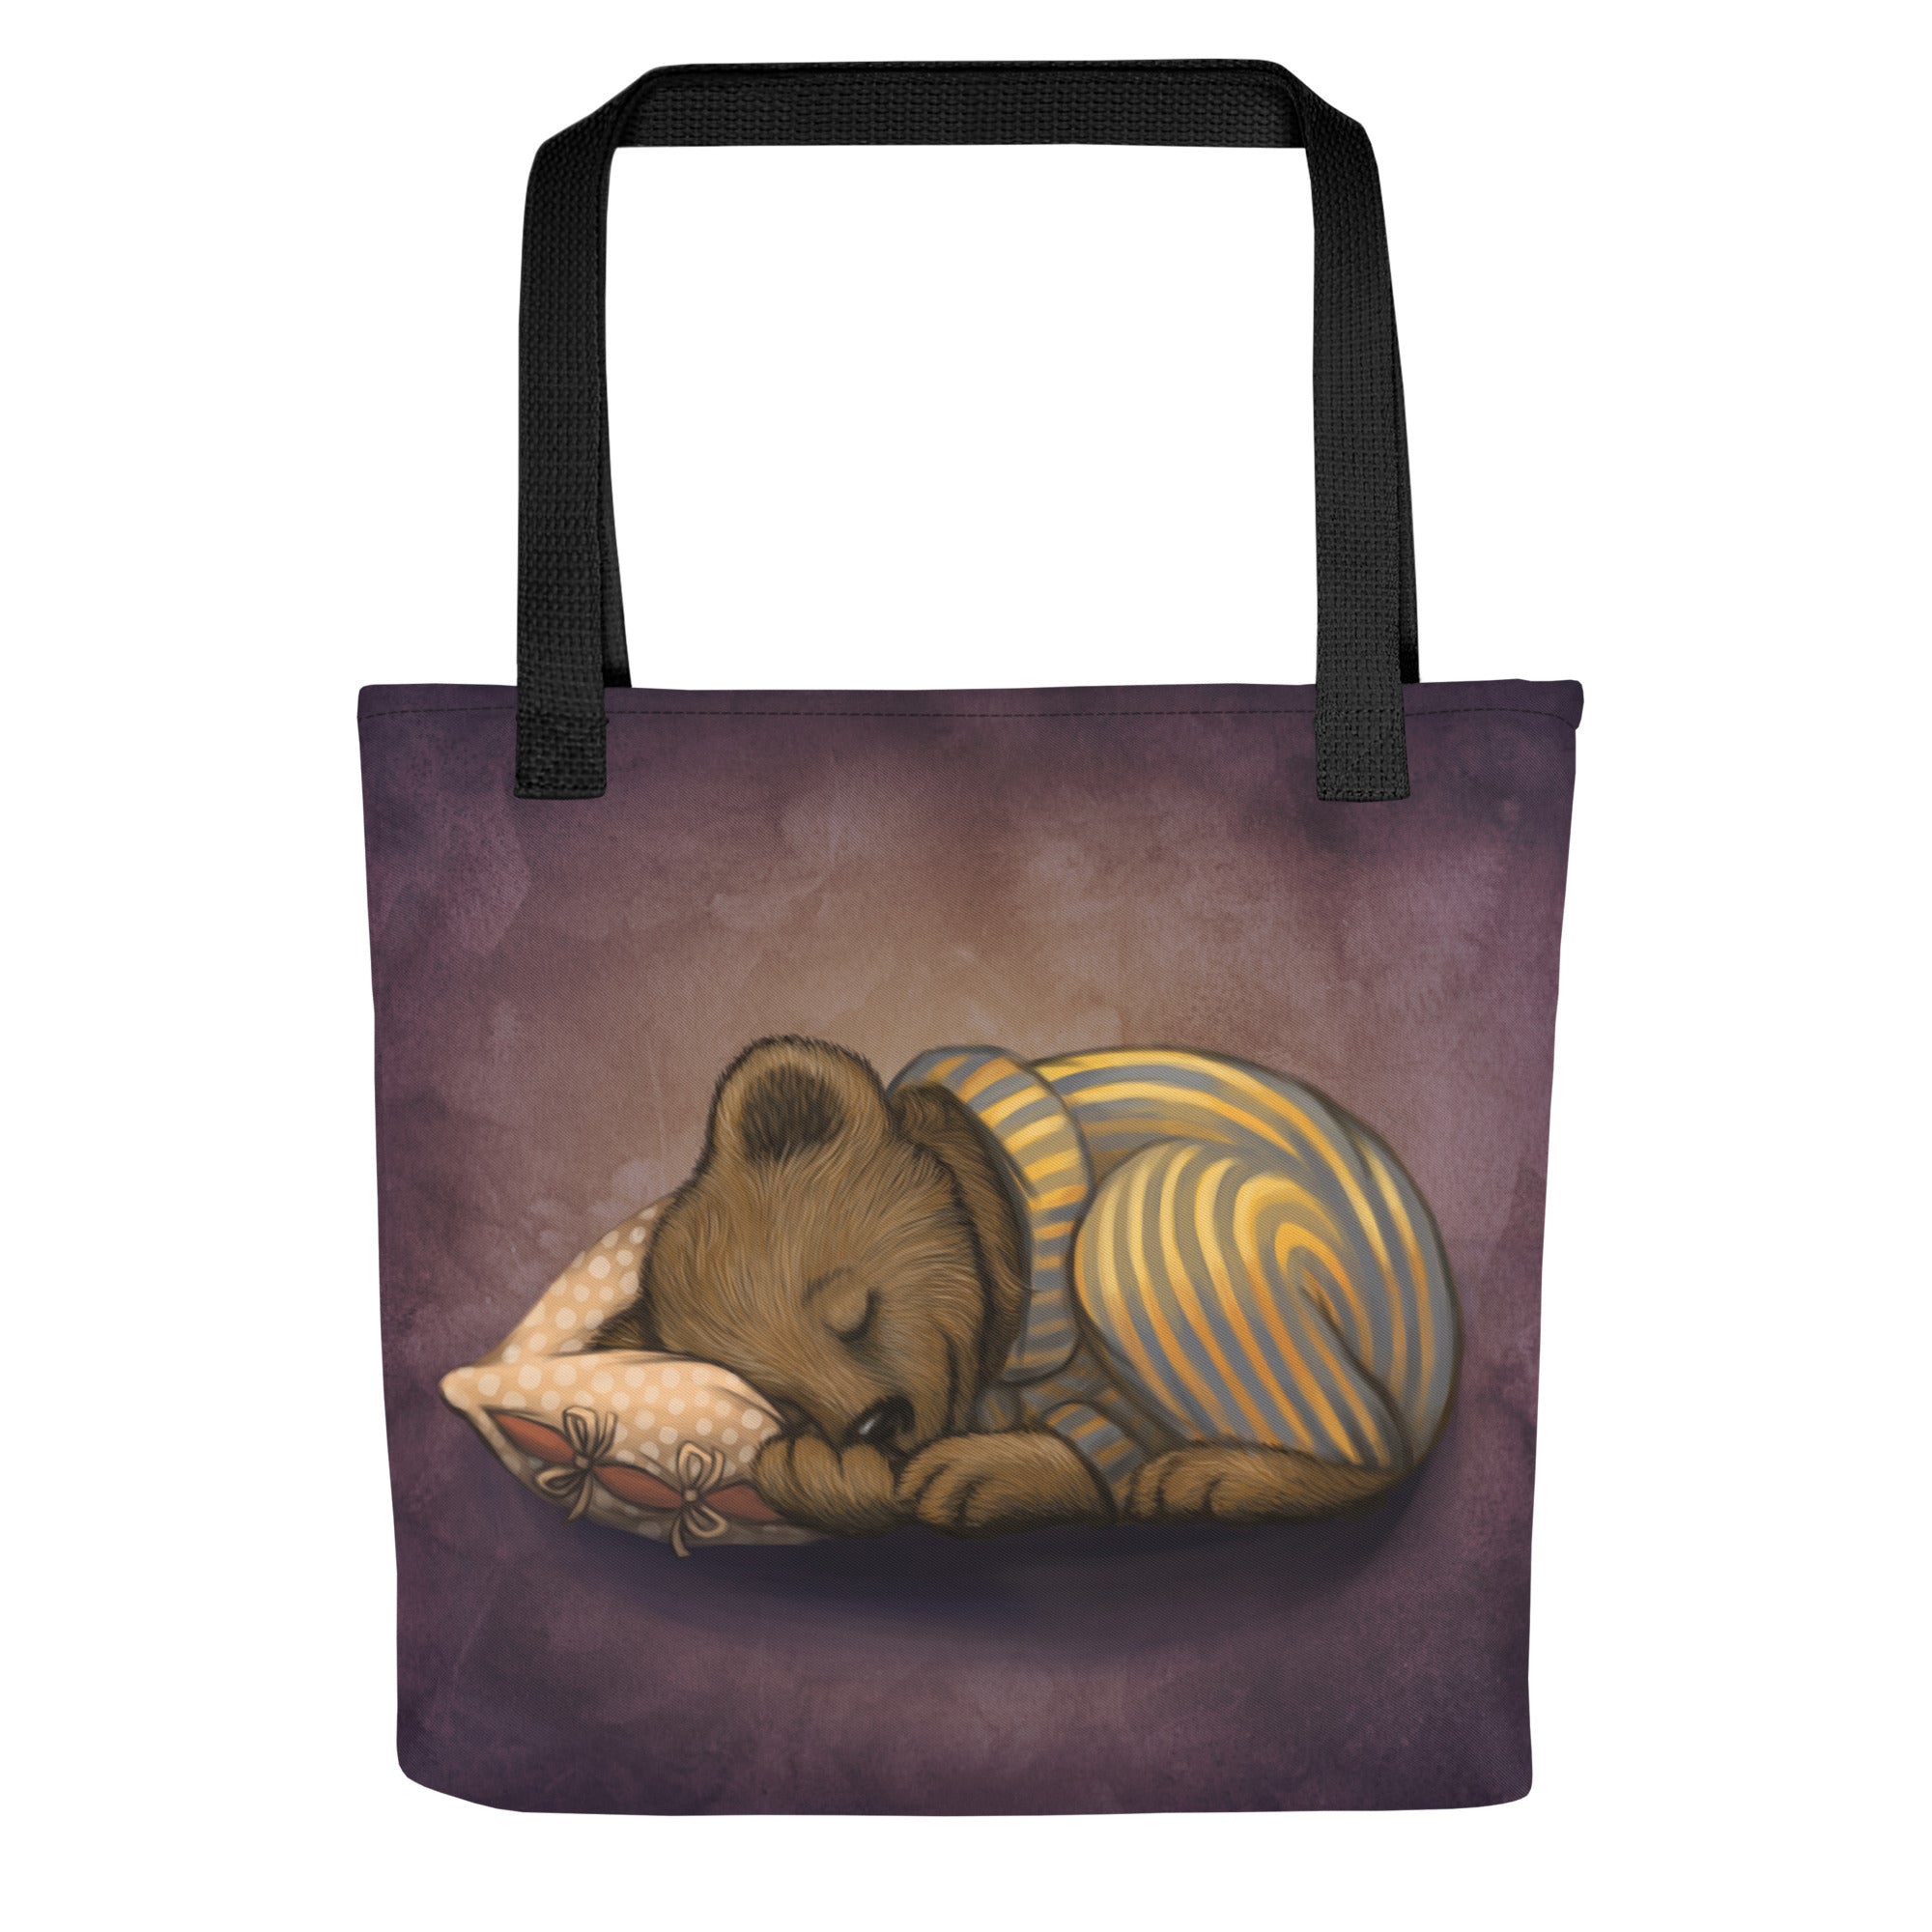 Tote bag "Morning is wiser than evening" (Bear)